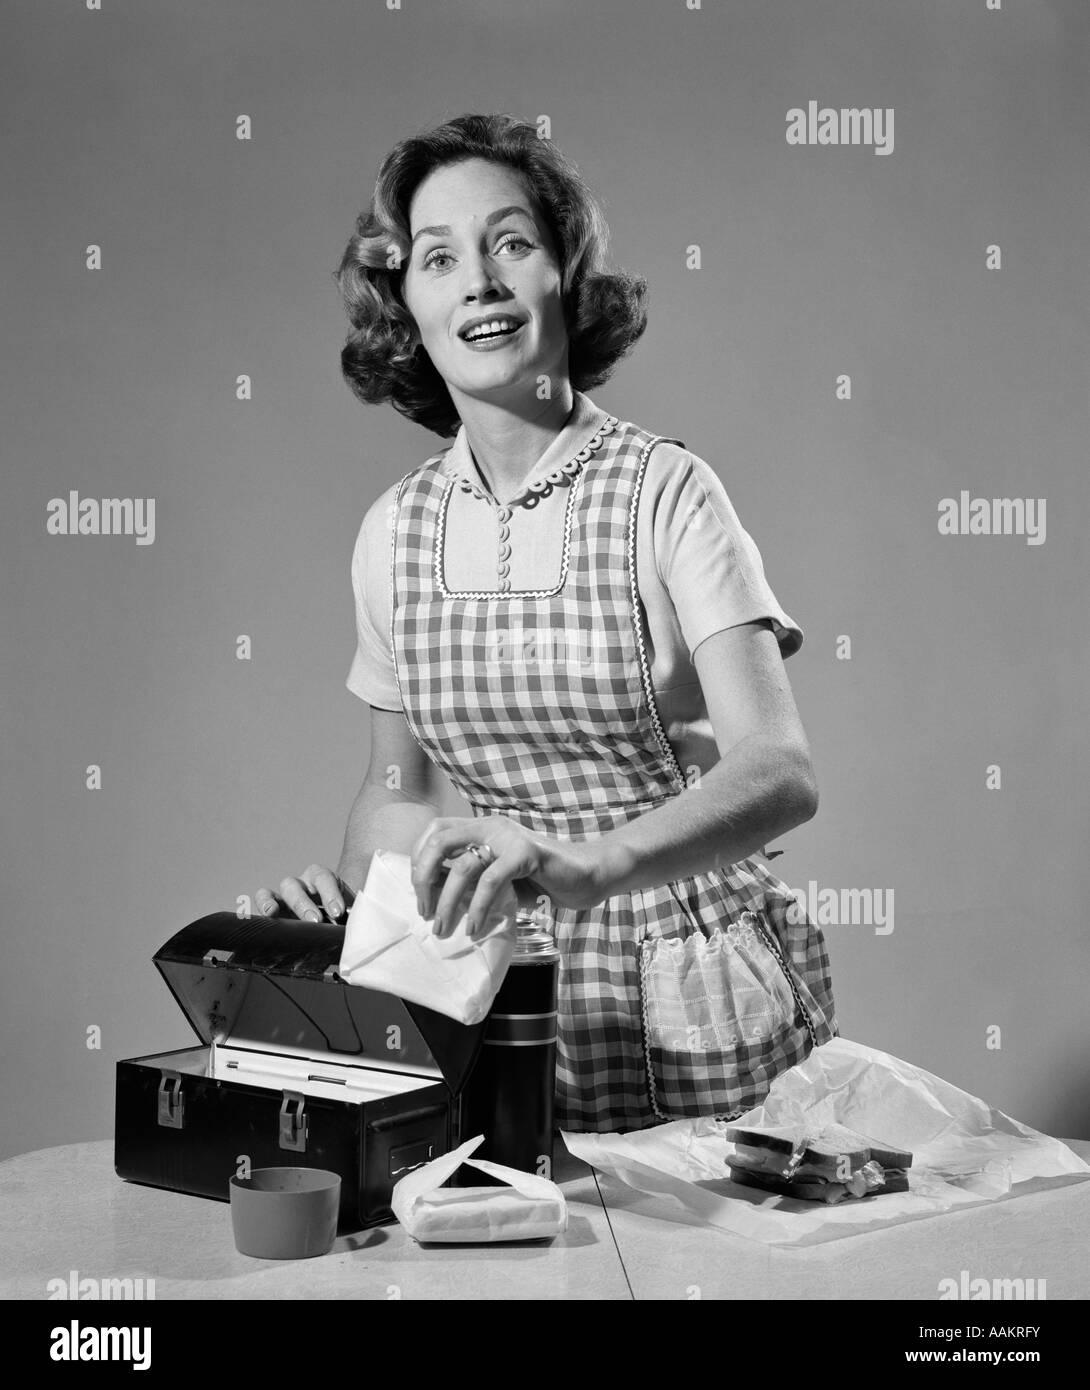 https://c8.alamy.com/comp/AAKRFY/1950s-1960s-woman-packing-sandwich-into-lunchbox-lunch-AAKRFY.jpg